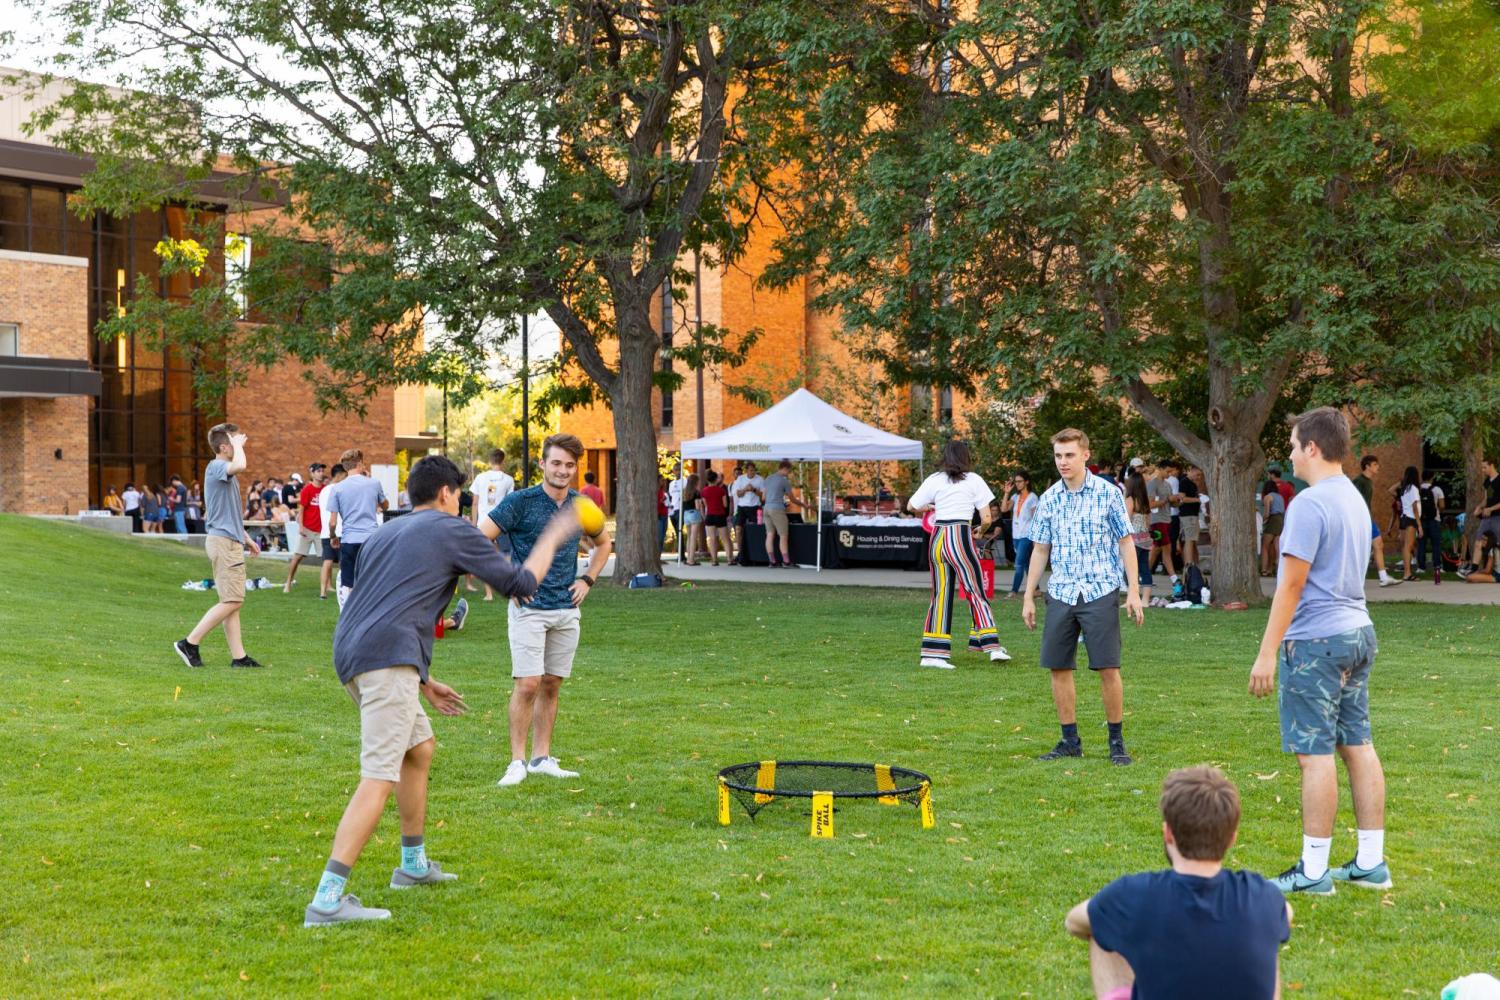 A group of students playing spike ball during a Williams Village welcome event